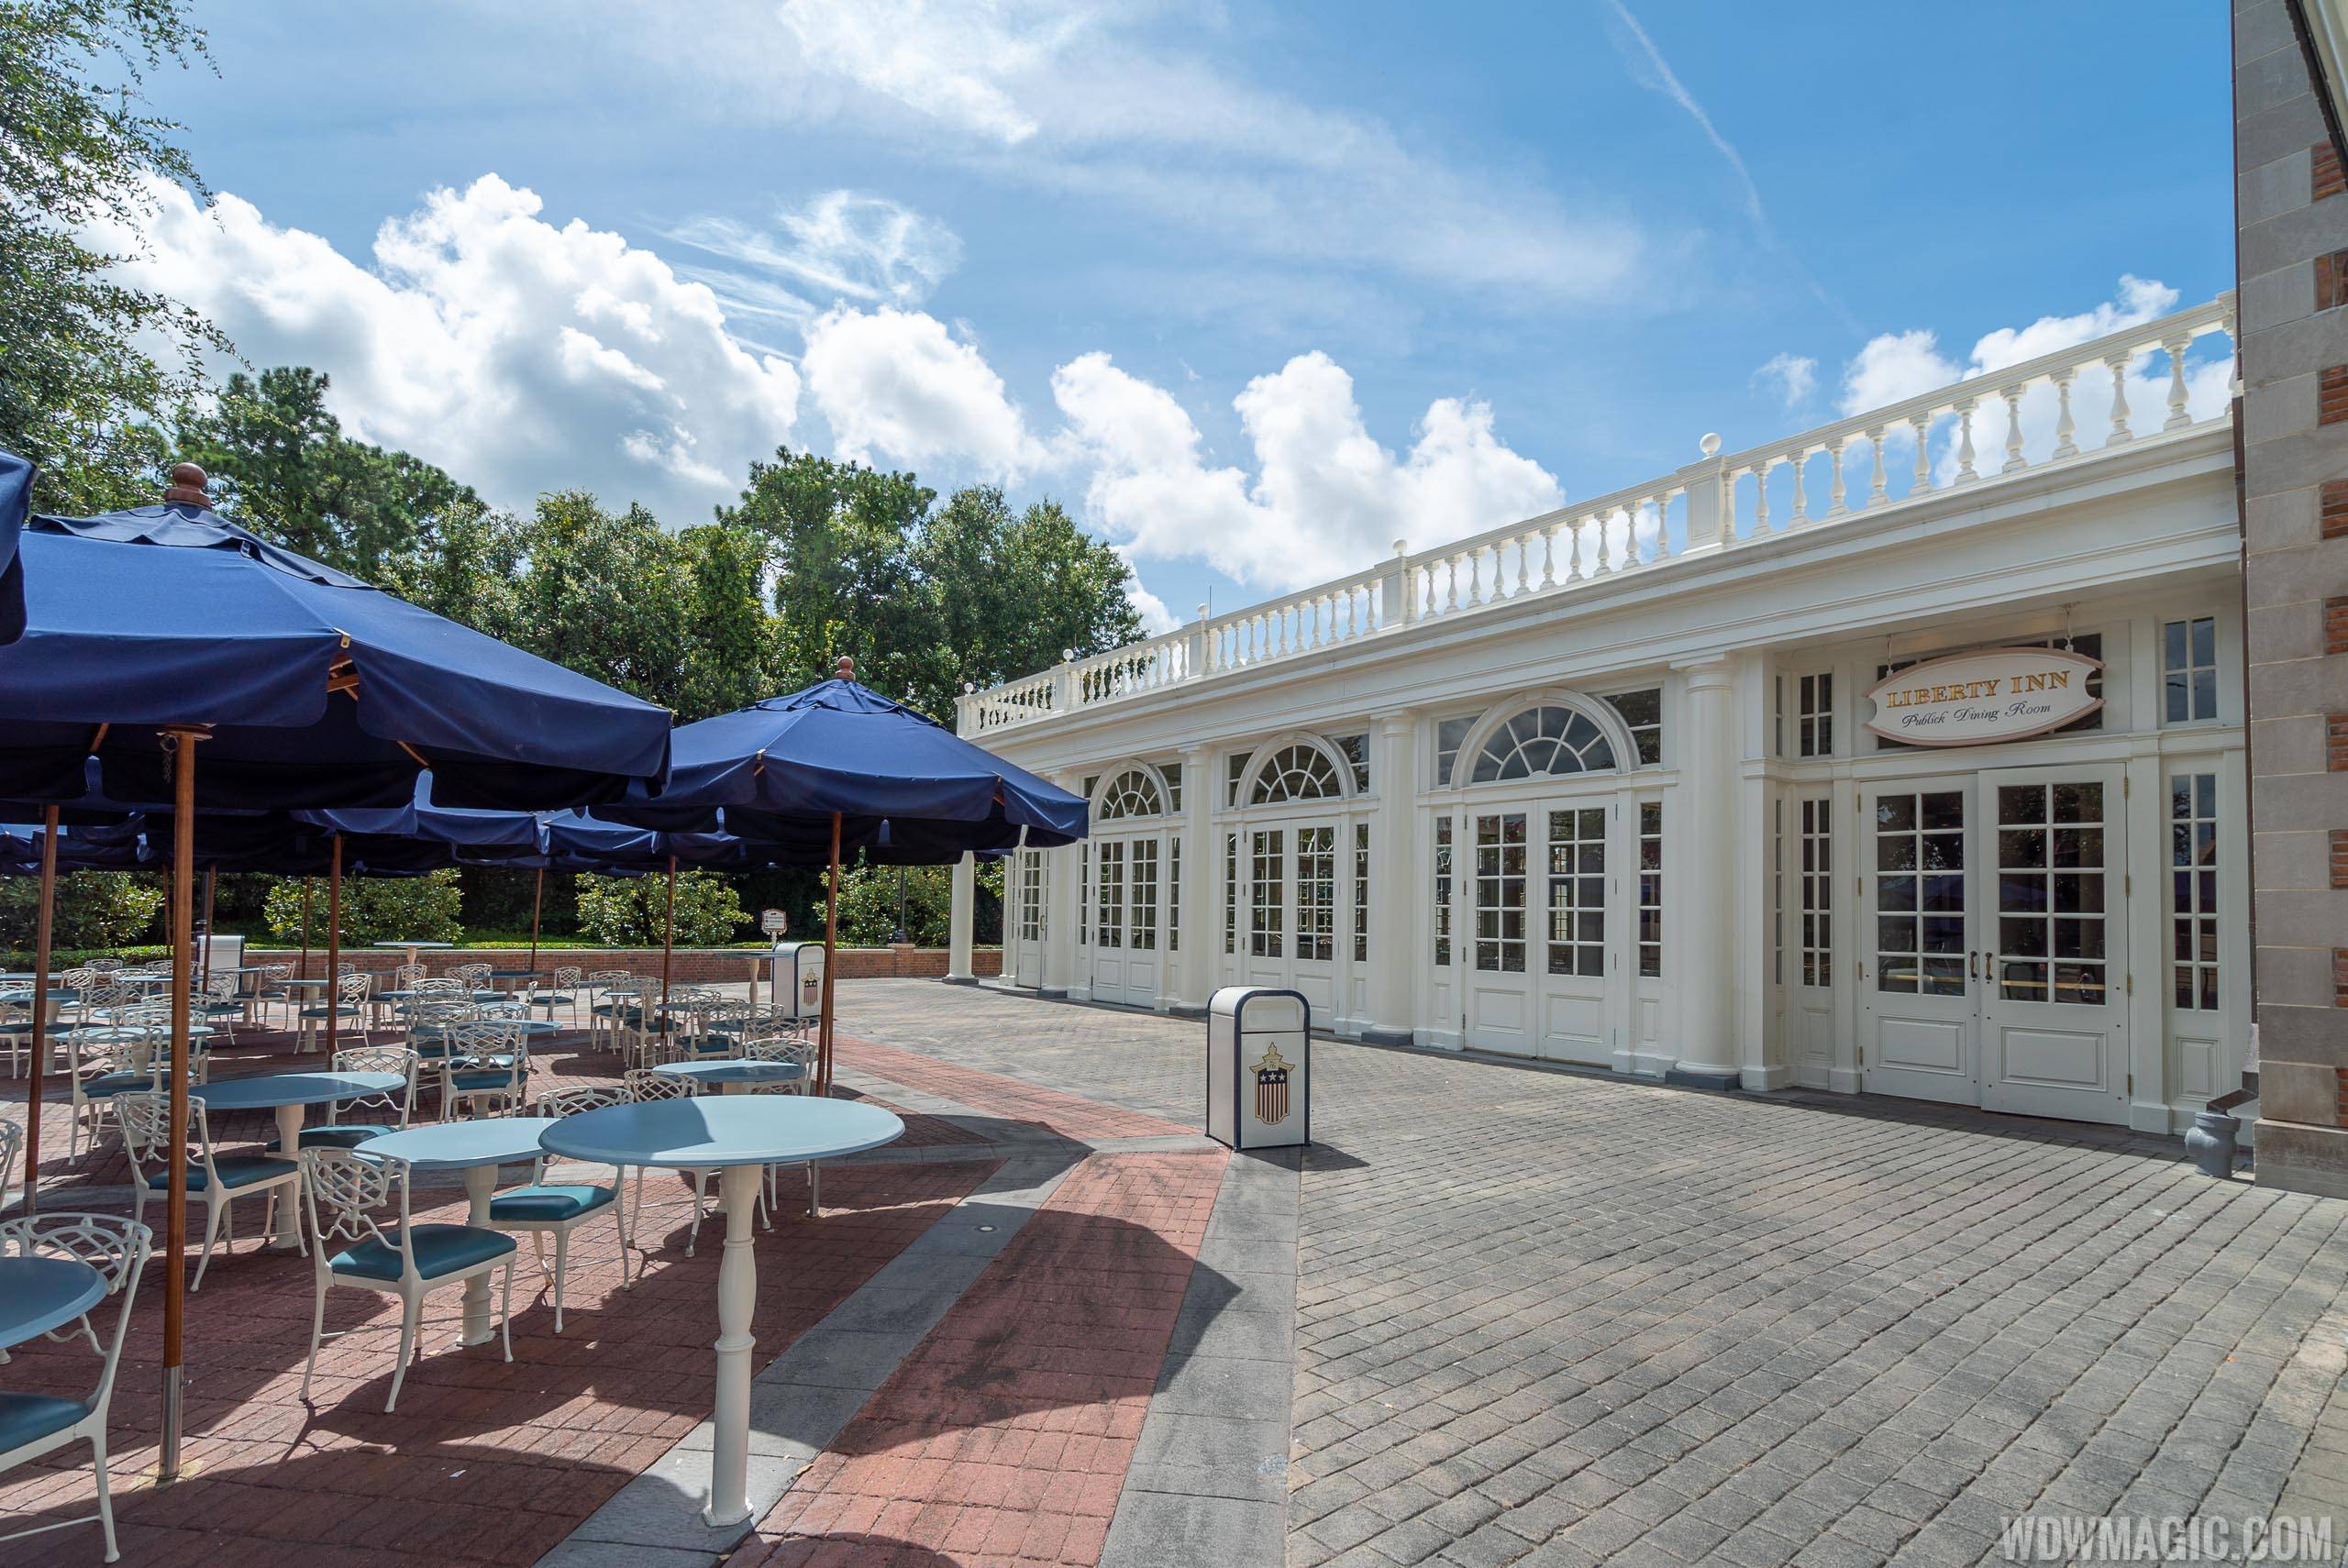 Regal Eagle Smokehouse Craft Drafts and Barbecue replacing the Liberty Inn at Epcot